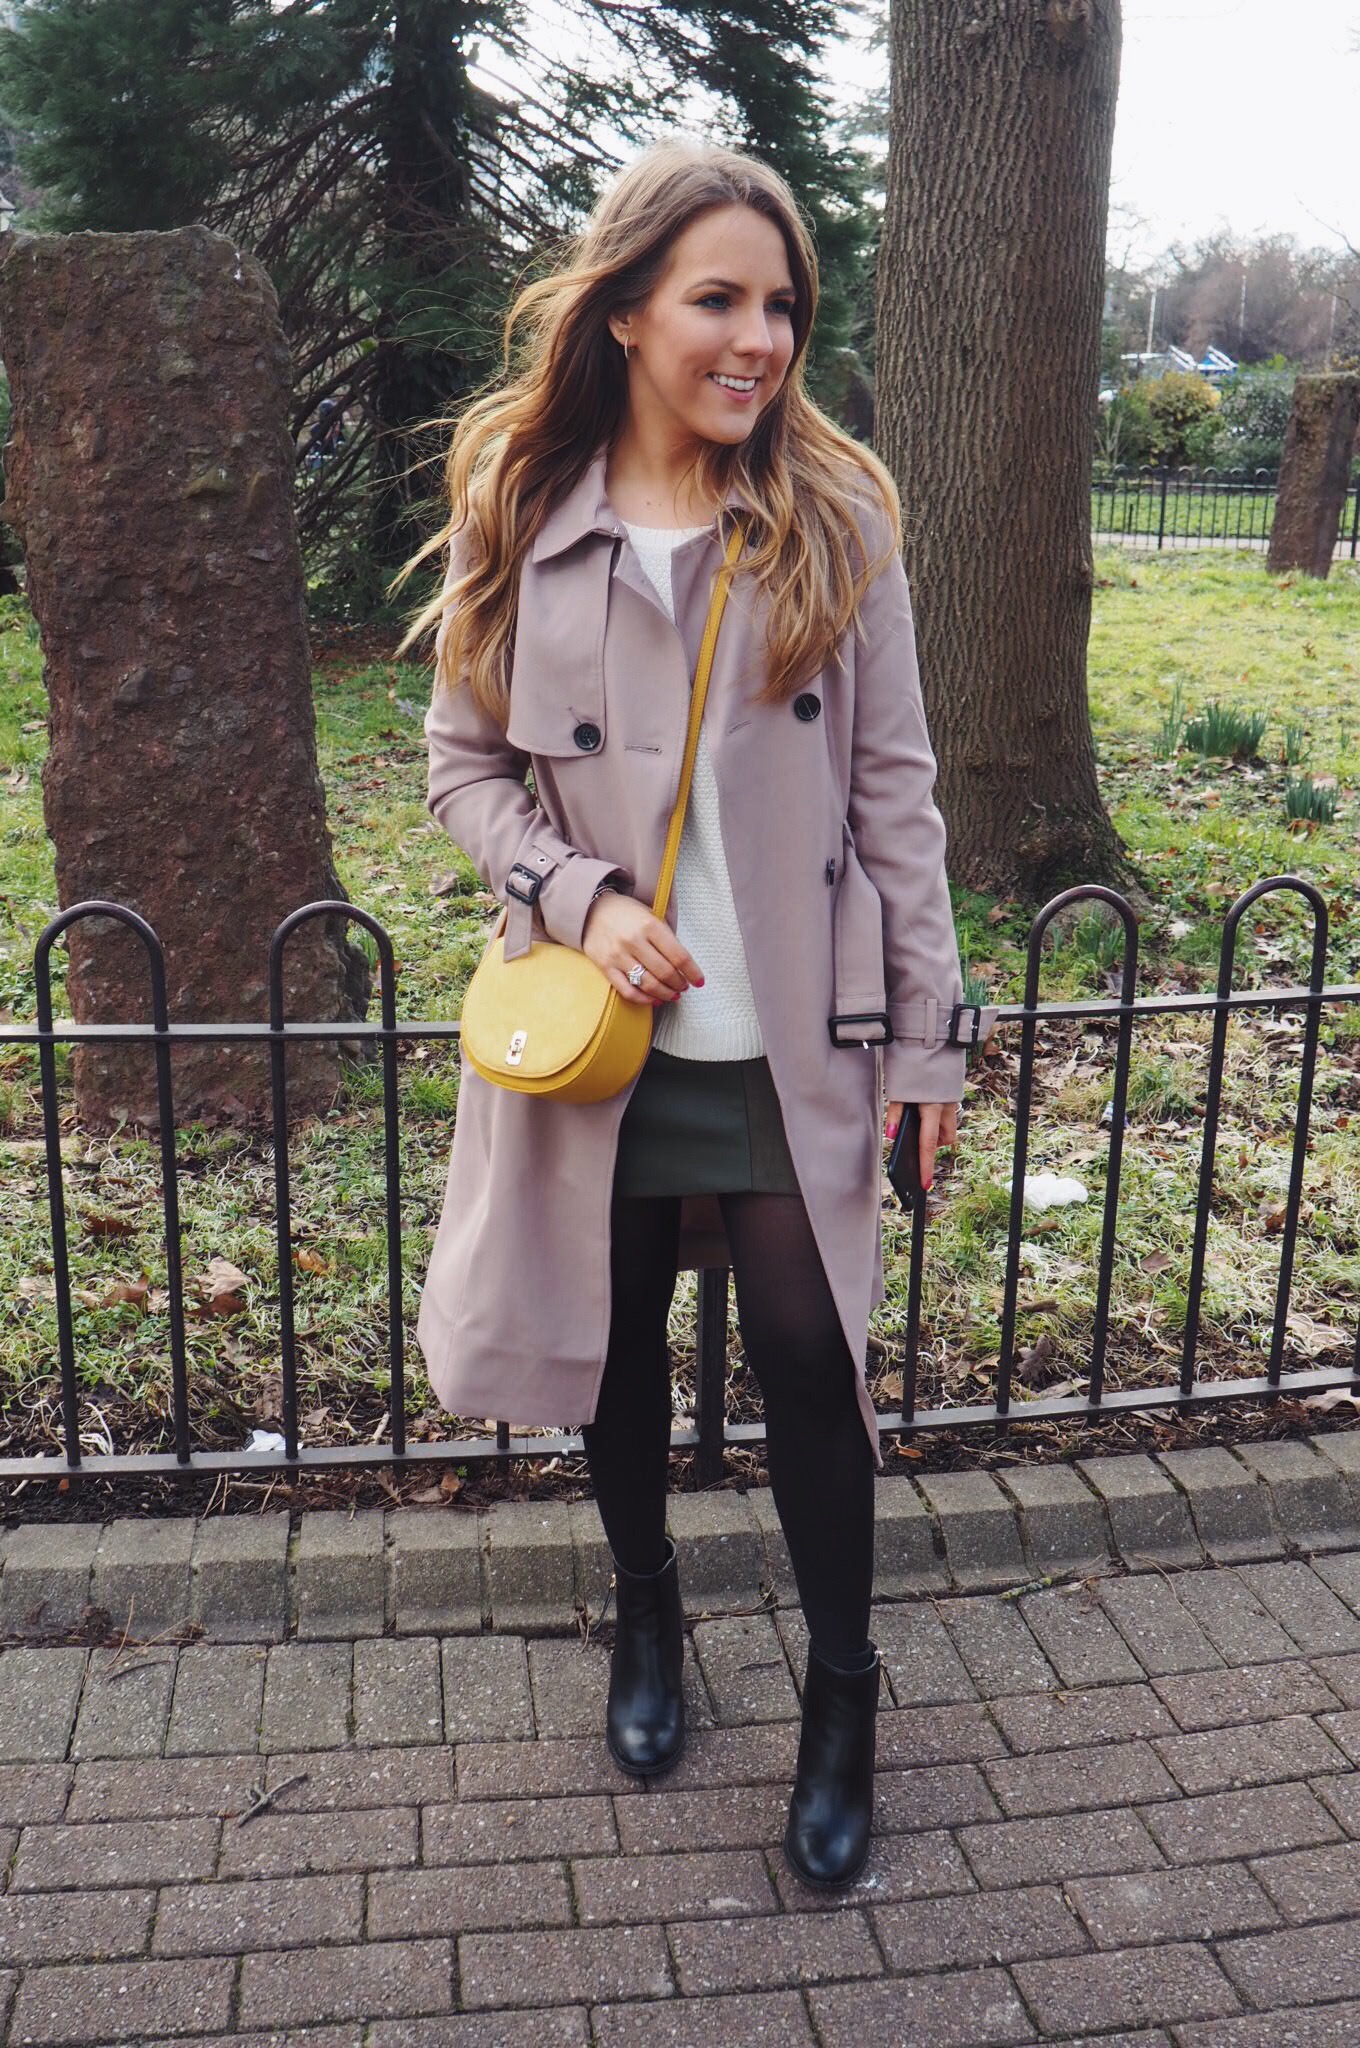 Oasis Martini Mac, Khaki suede skirt, yellow cross body bag, cream cable knit jumper, high heeled black boots